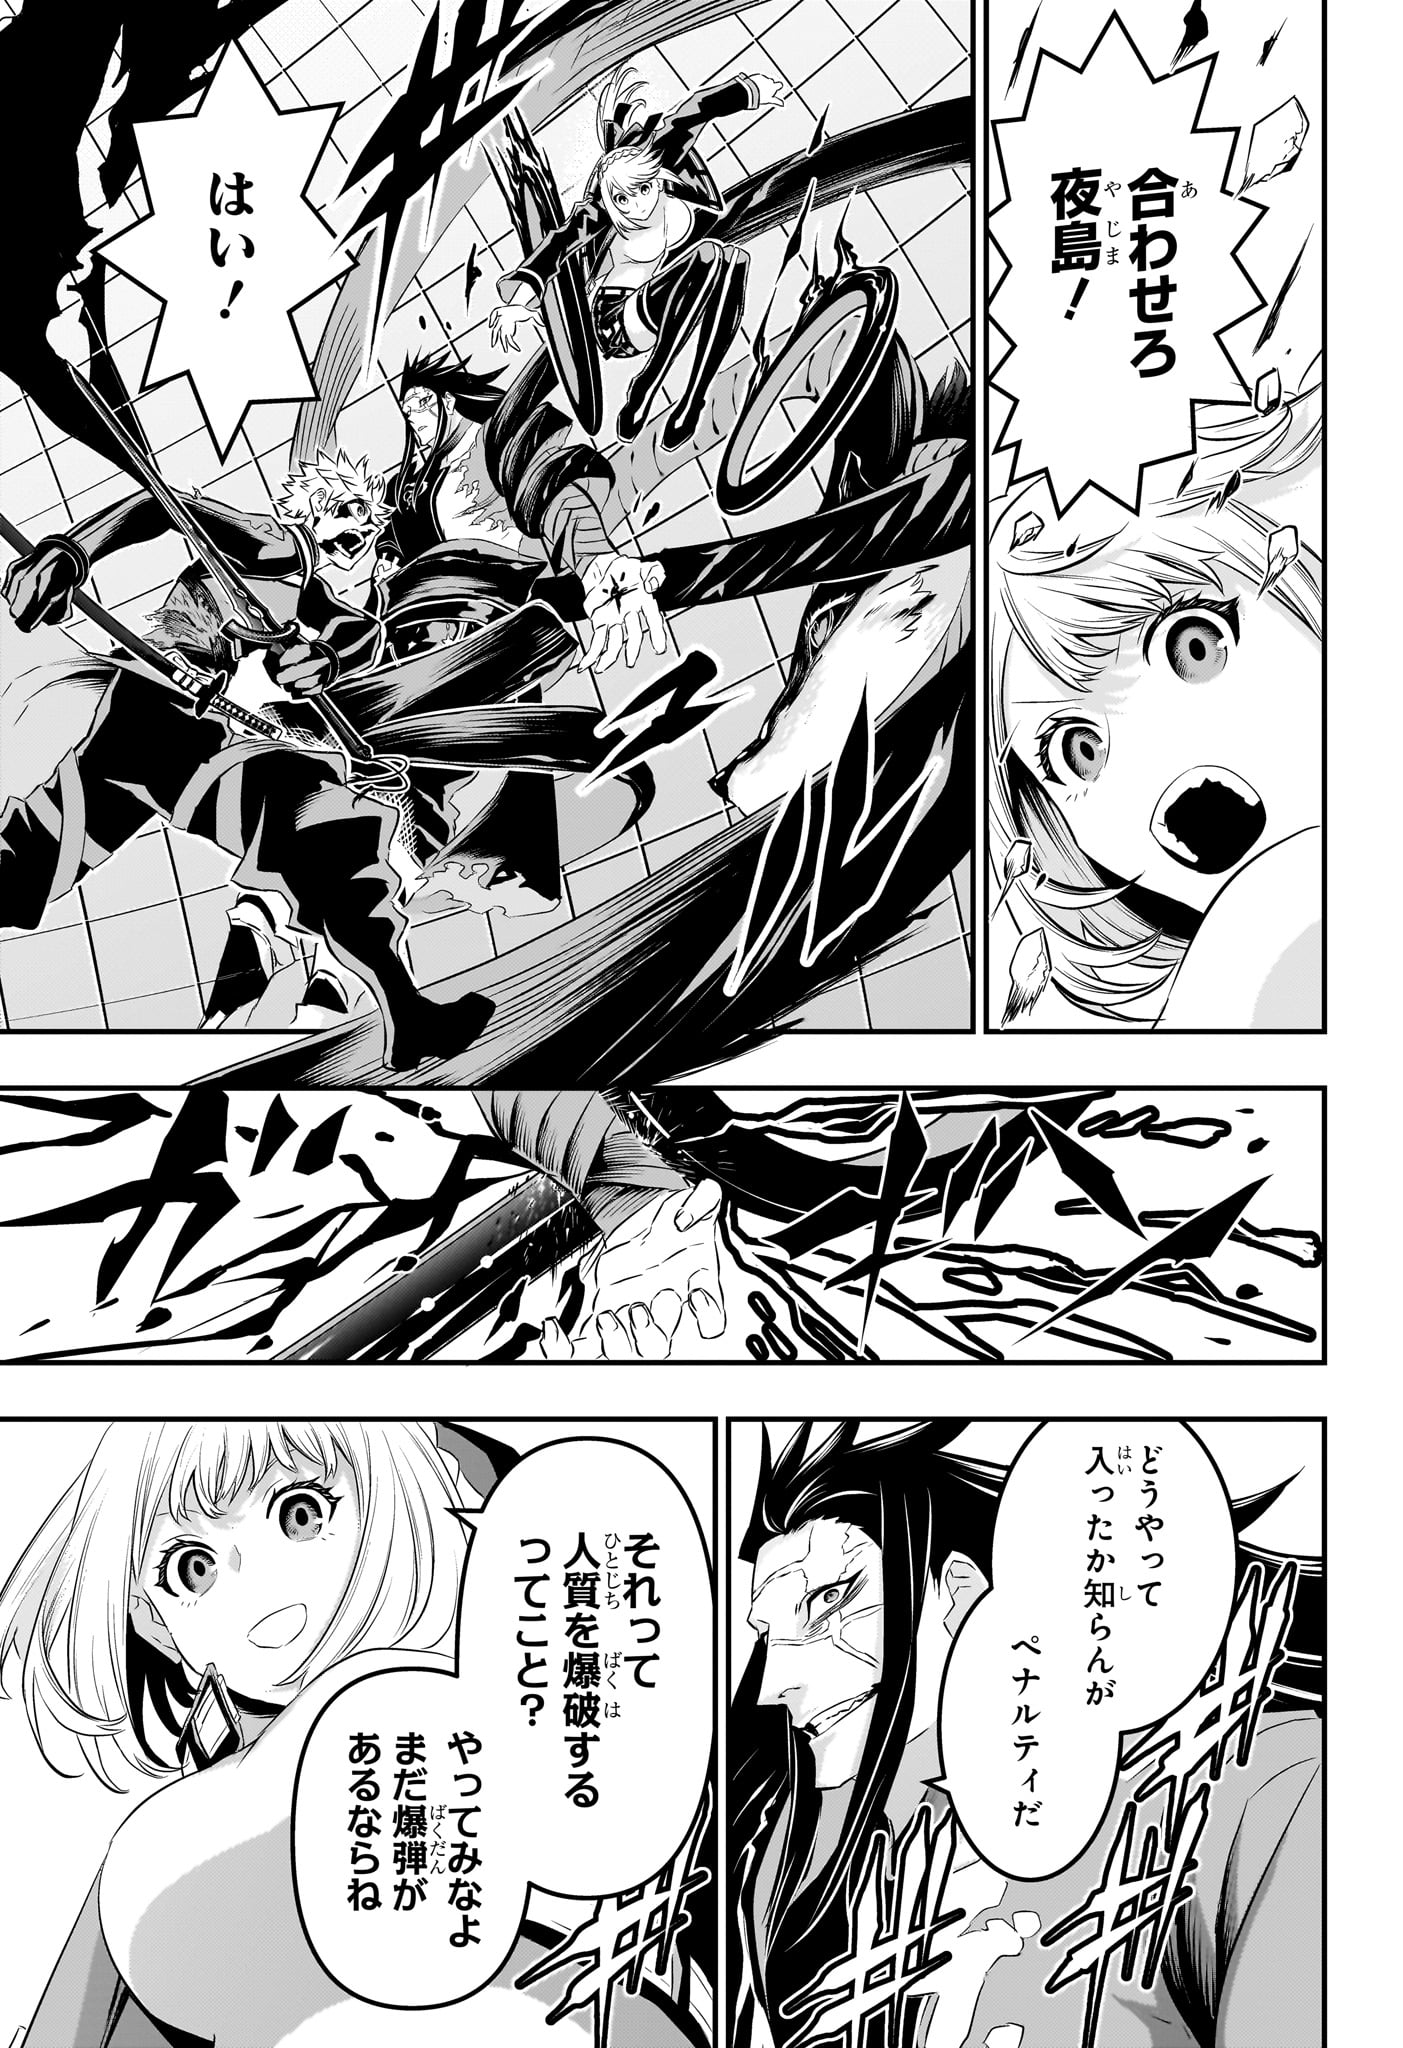 Nue no Onmyouji - Chapter 55 - Page 17